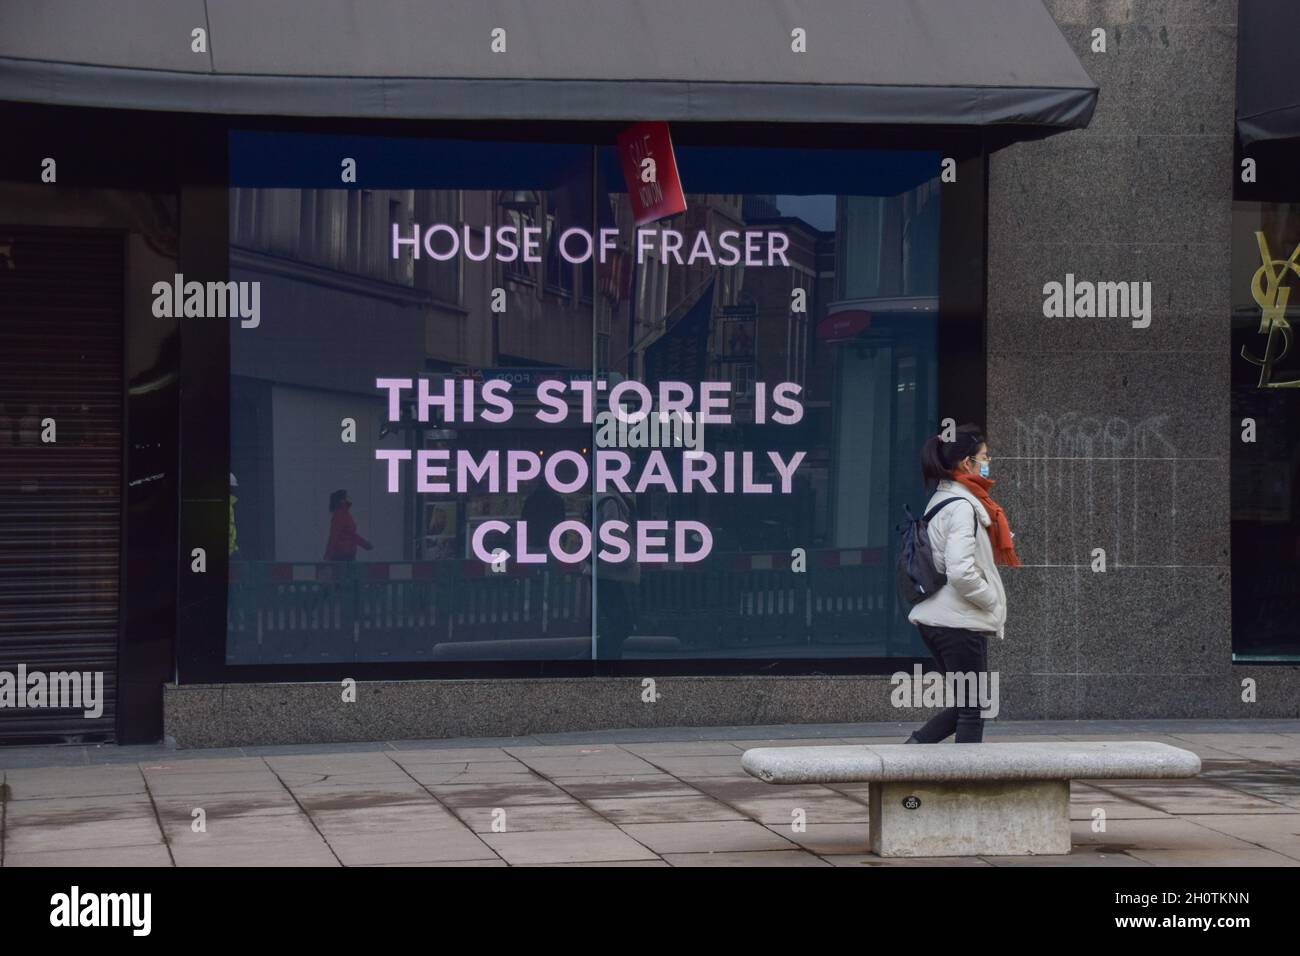 A woman with a face mask walks past a Closed store sign at House of Fraser department store on Oxford Street during the nationwide coronavirus lockdown in England. 10th February 2021. Stock Photo